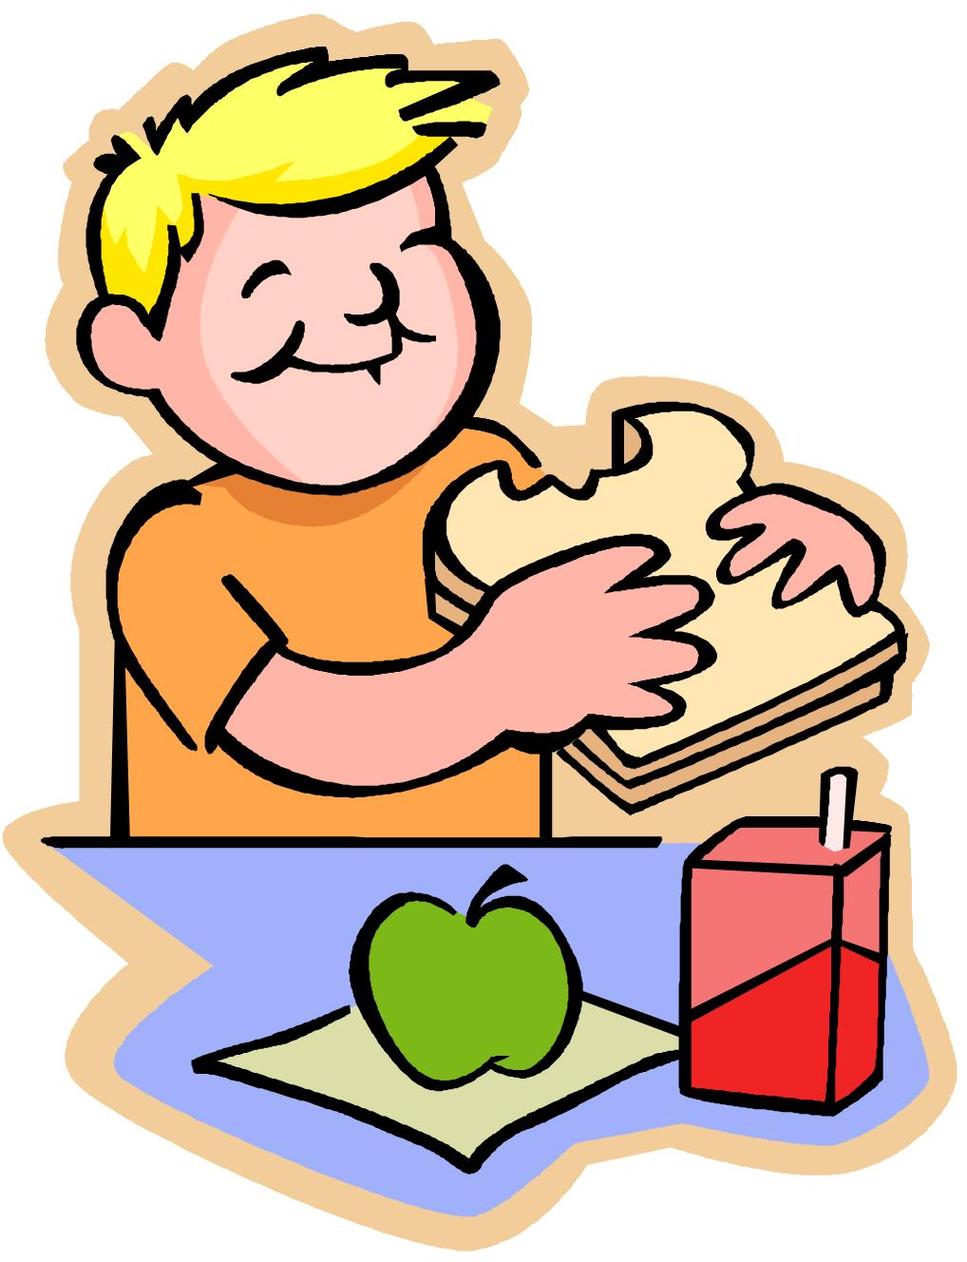 Cafeteria Tray Clipart Panda Free Images Clipart - Free to use ...